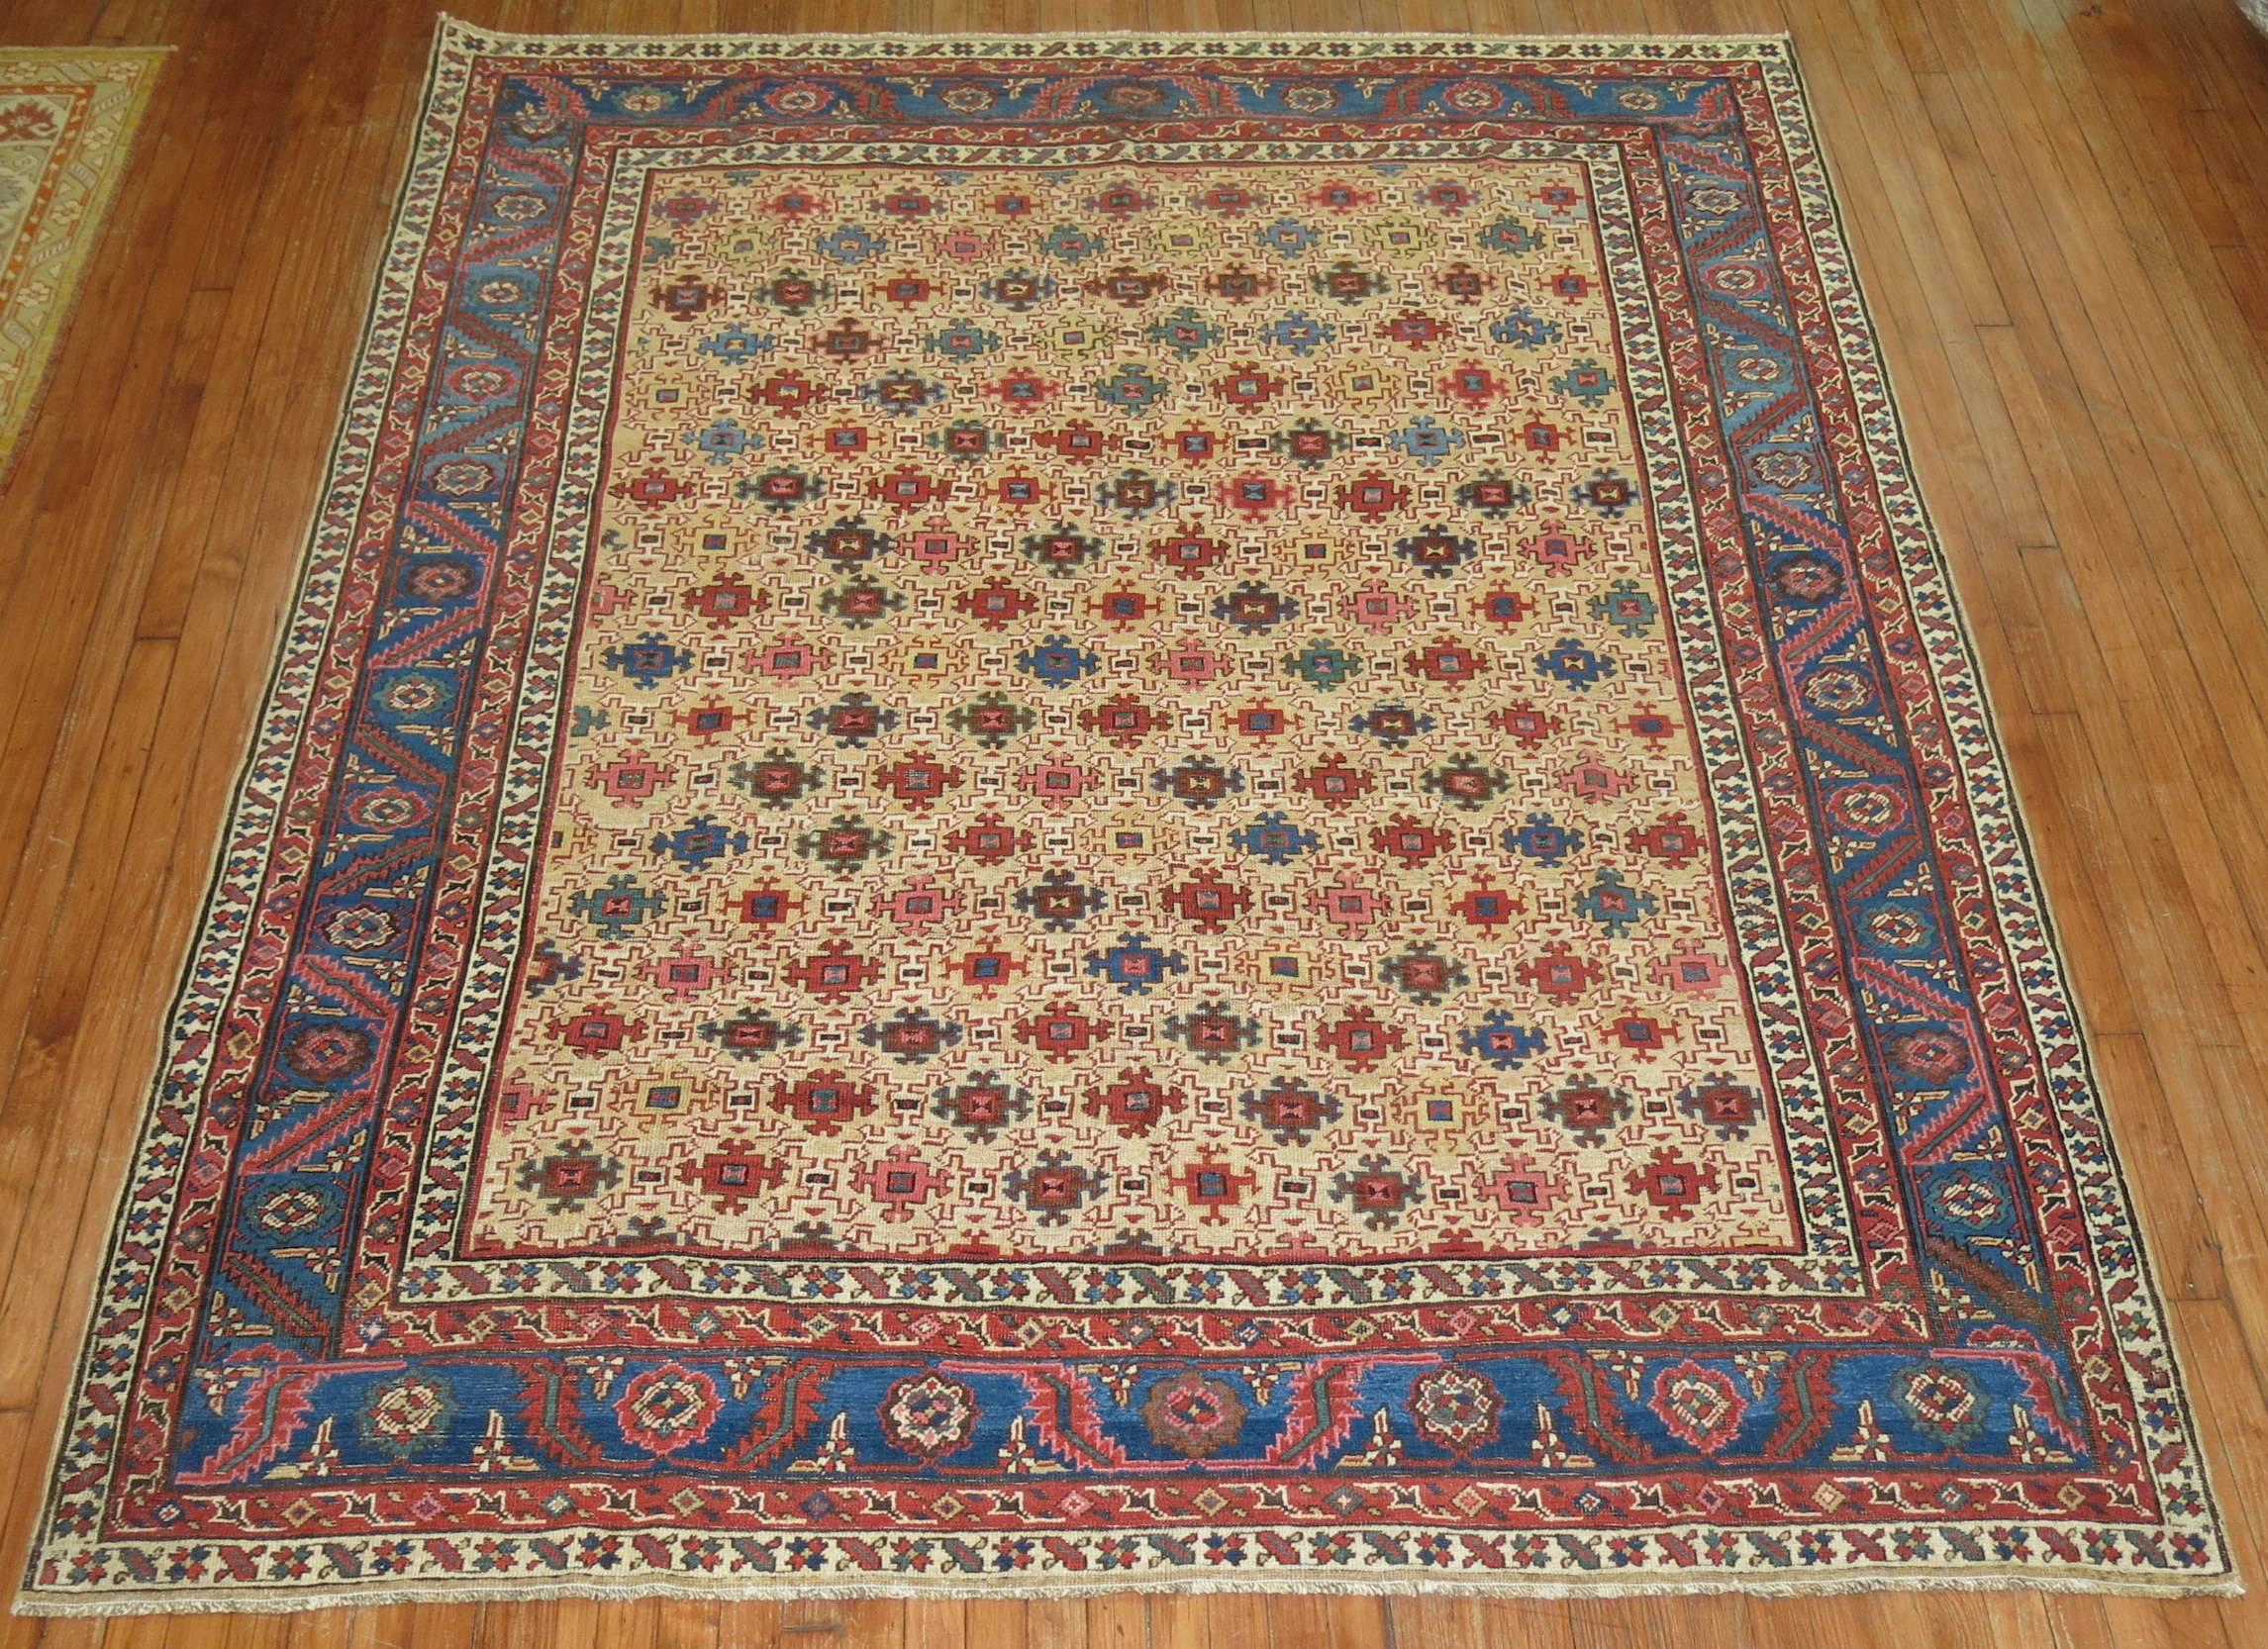 Rare size Persian Bakshaish rug with an all-over design in different assortment of colors.

20th century examples of Bakshaish weavings are very artistically distinguished and have performed as solid art investments. This particular example is an